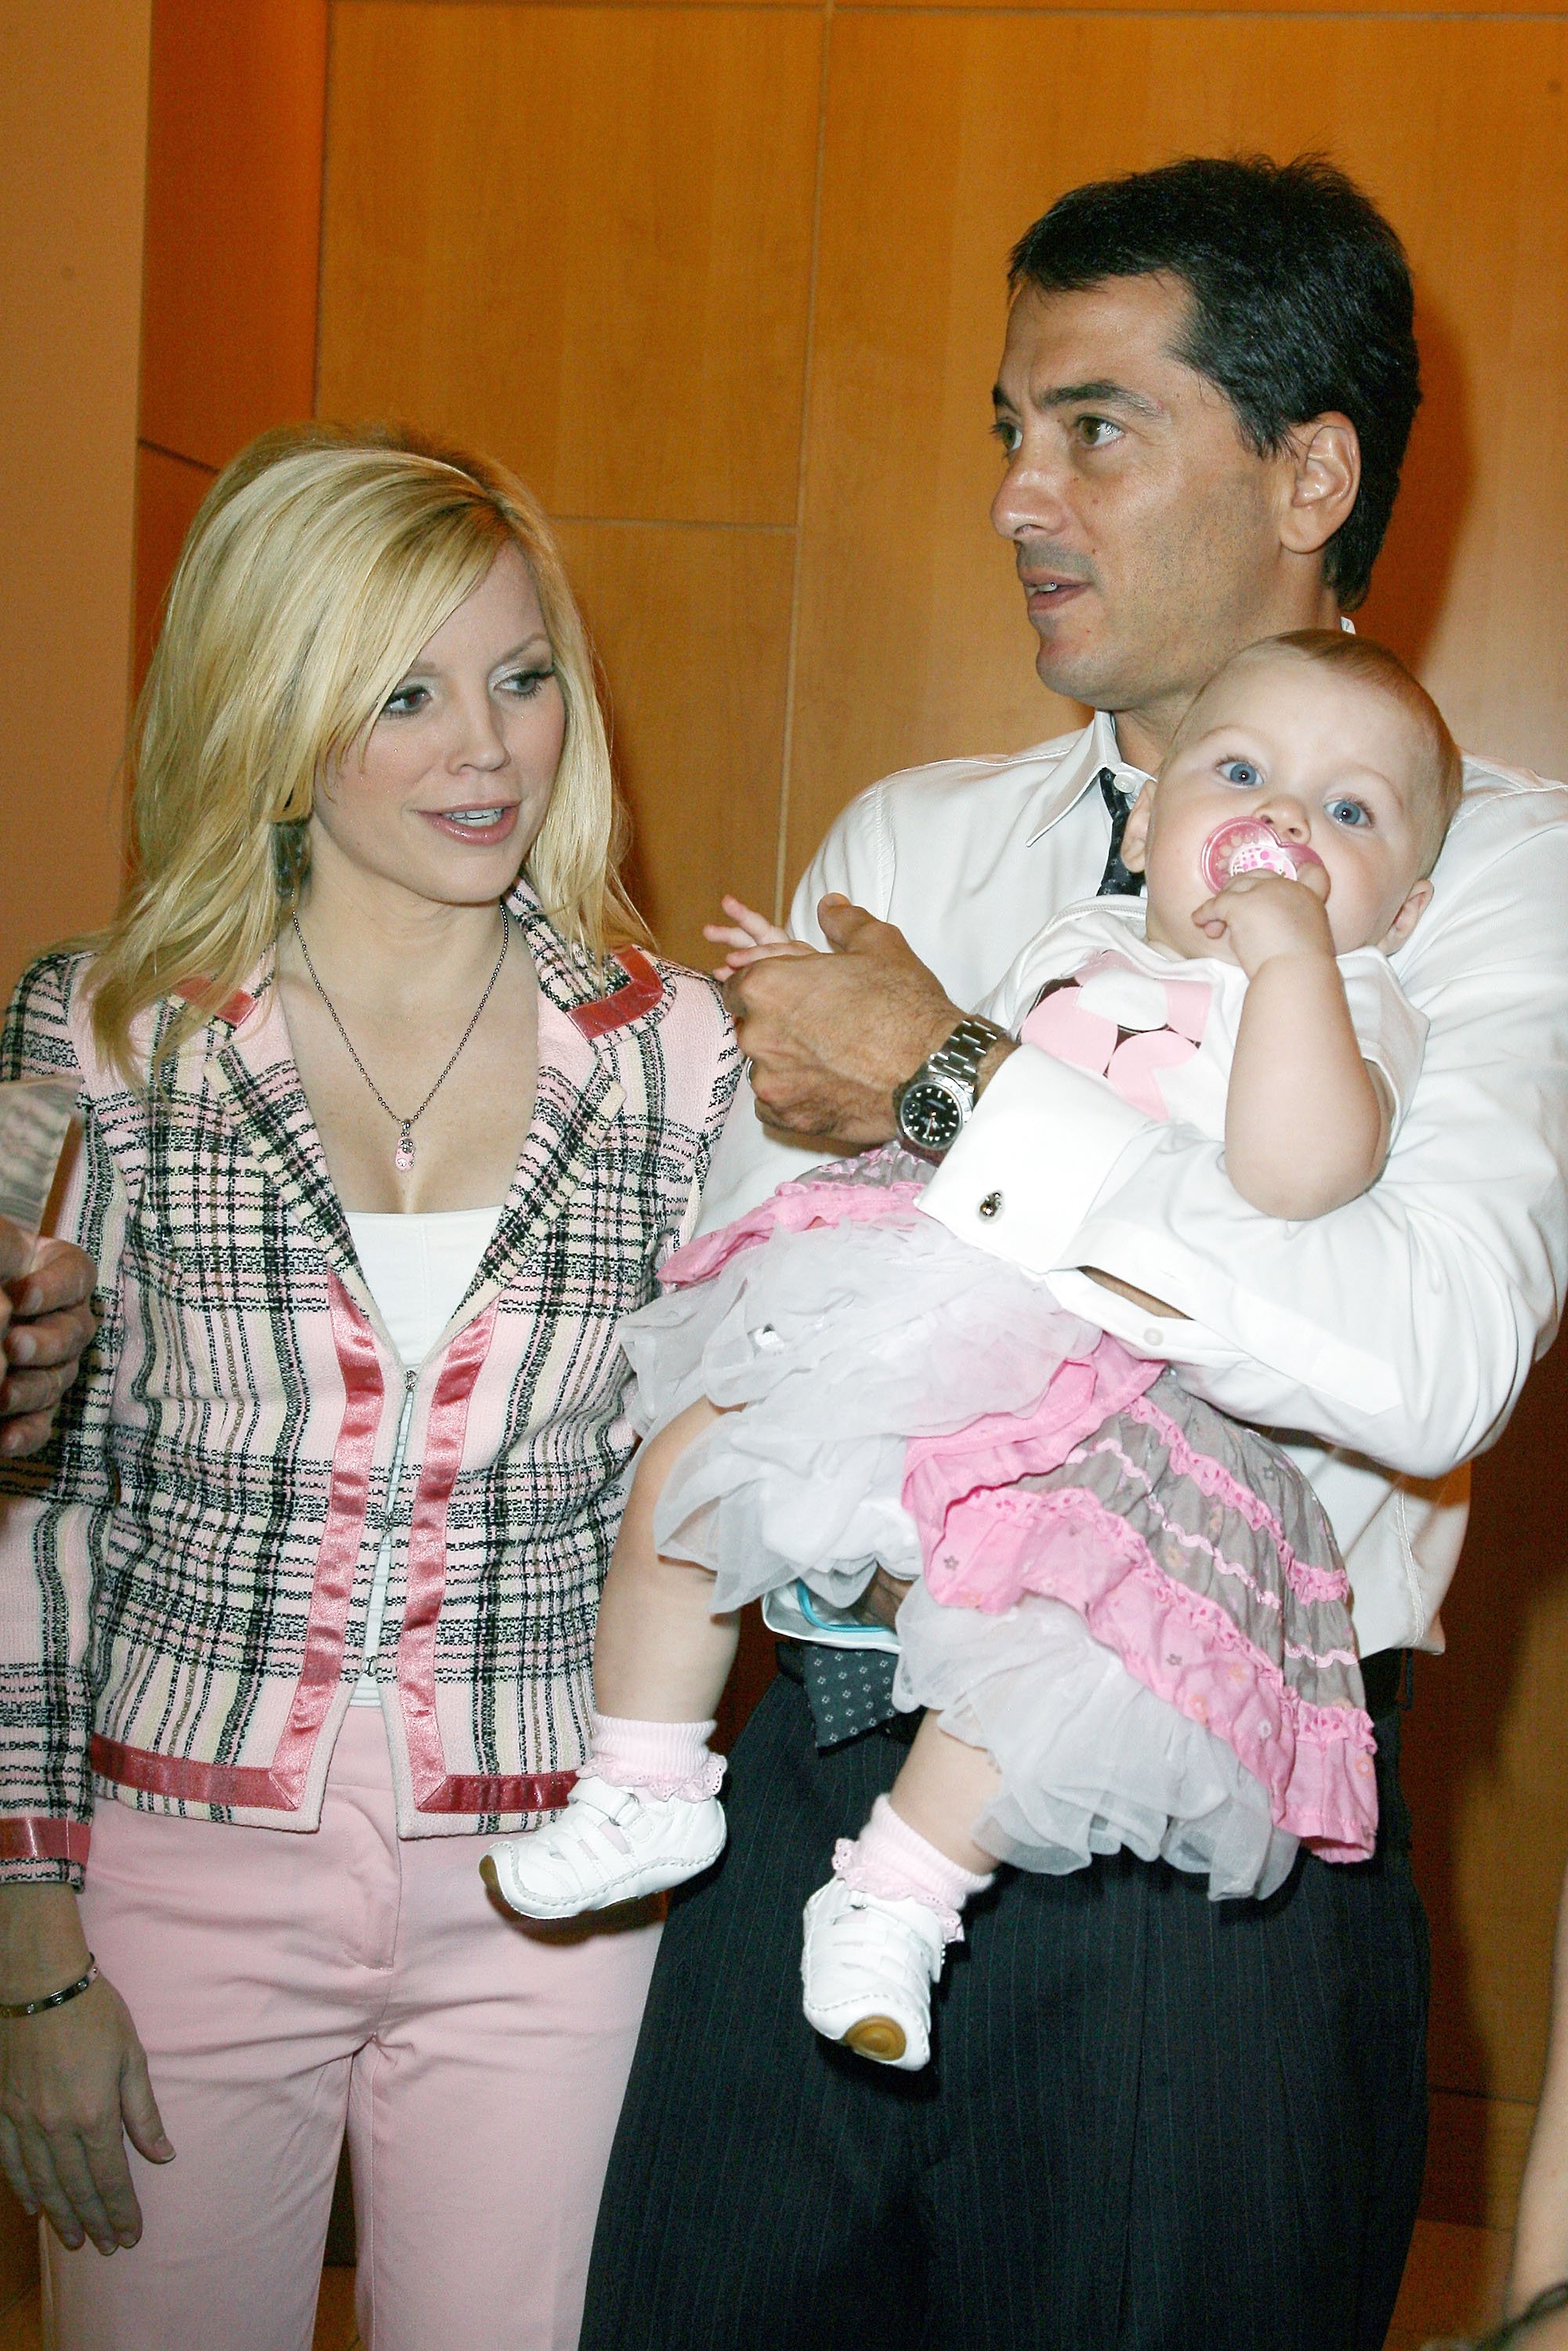 Scott Baio with his wife Renee Sloan and daughter Bailey during a press conference to promote Save Babies Through Screening Foundation at UCLA September 5, 2008 in Westwood, California. / Source: Getty Images